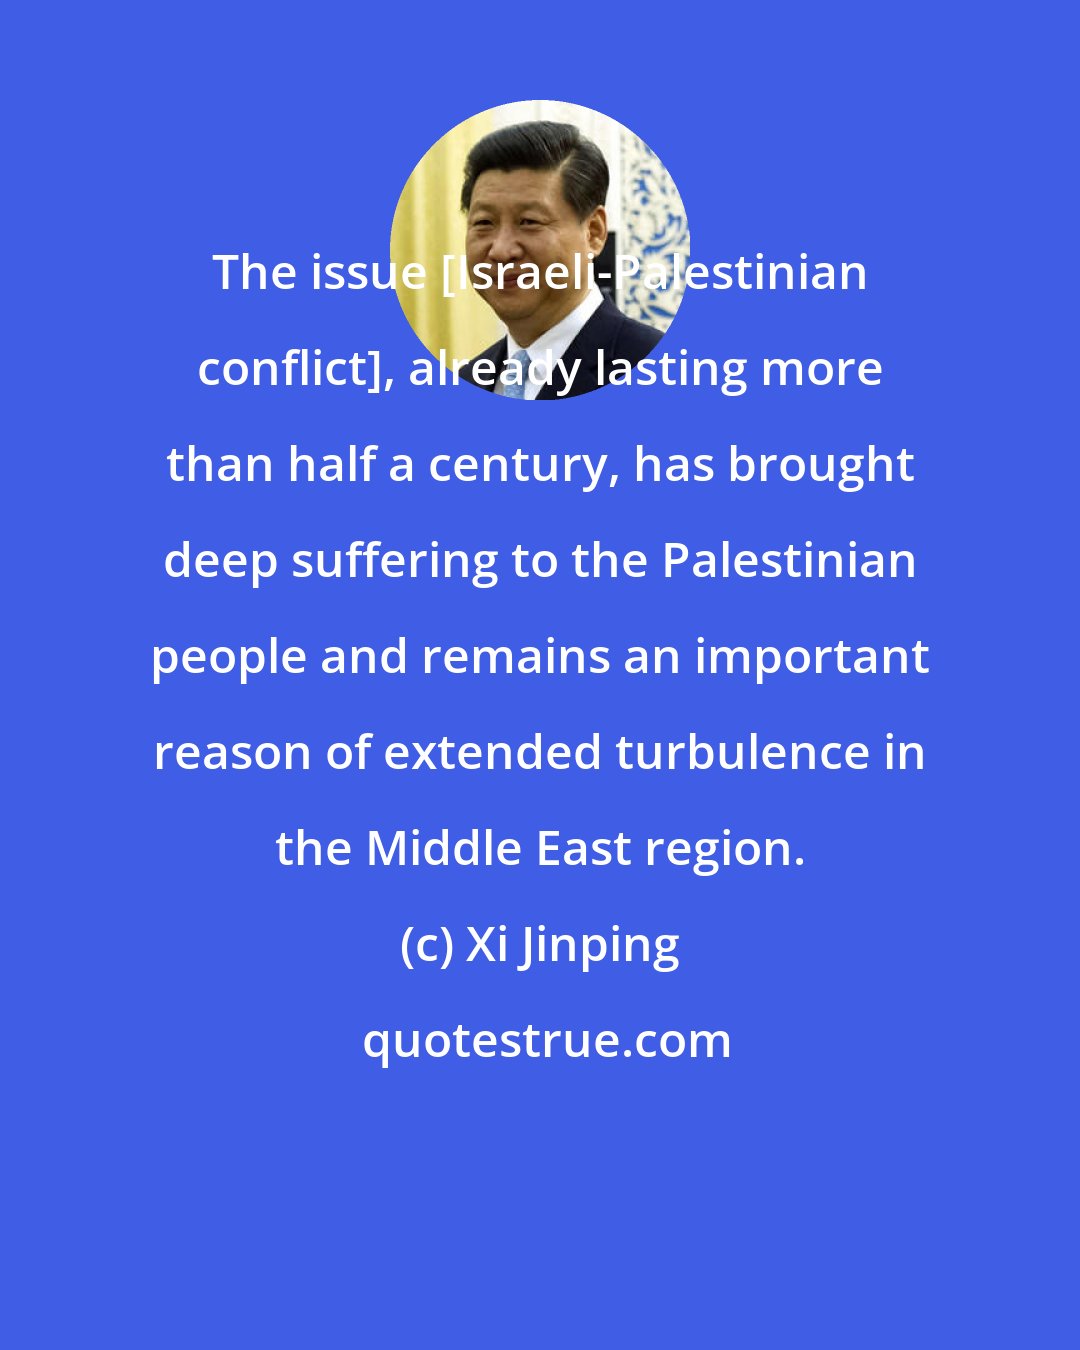 Xi Jinping: The issue [Israeli-Palestinian conflict], already lasting more than half a century, has brought deep suffering to the Palestinian people and remains an important reason of extended turbulence in the Middle East region.